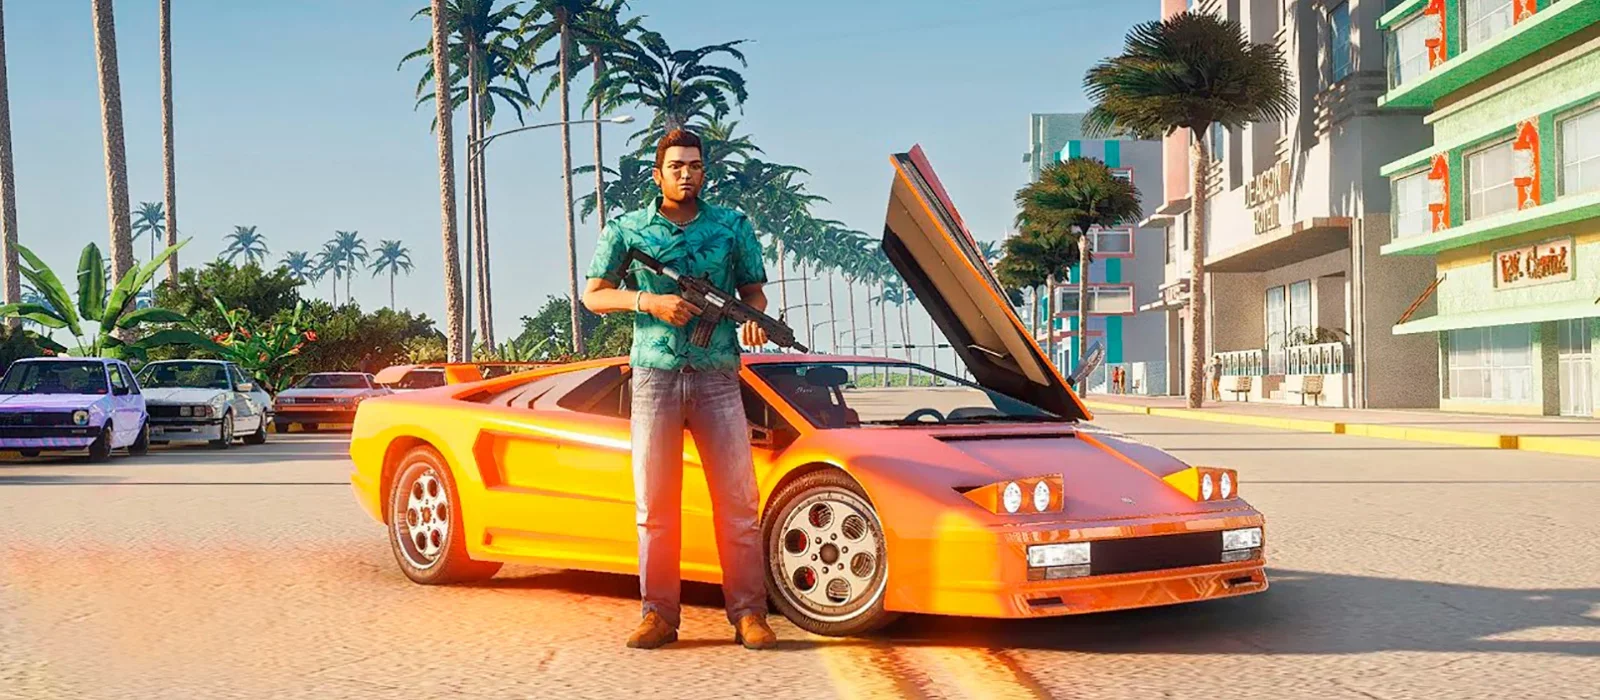 NVIDIA RTX Remix technology helped improve the graphics of GTA: Vice City